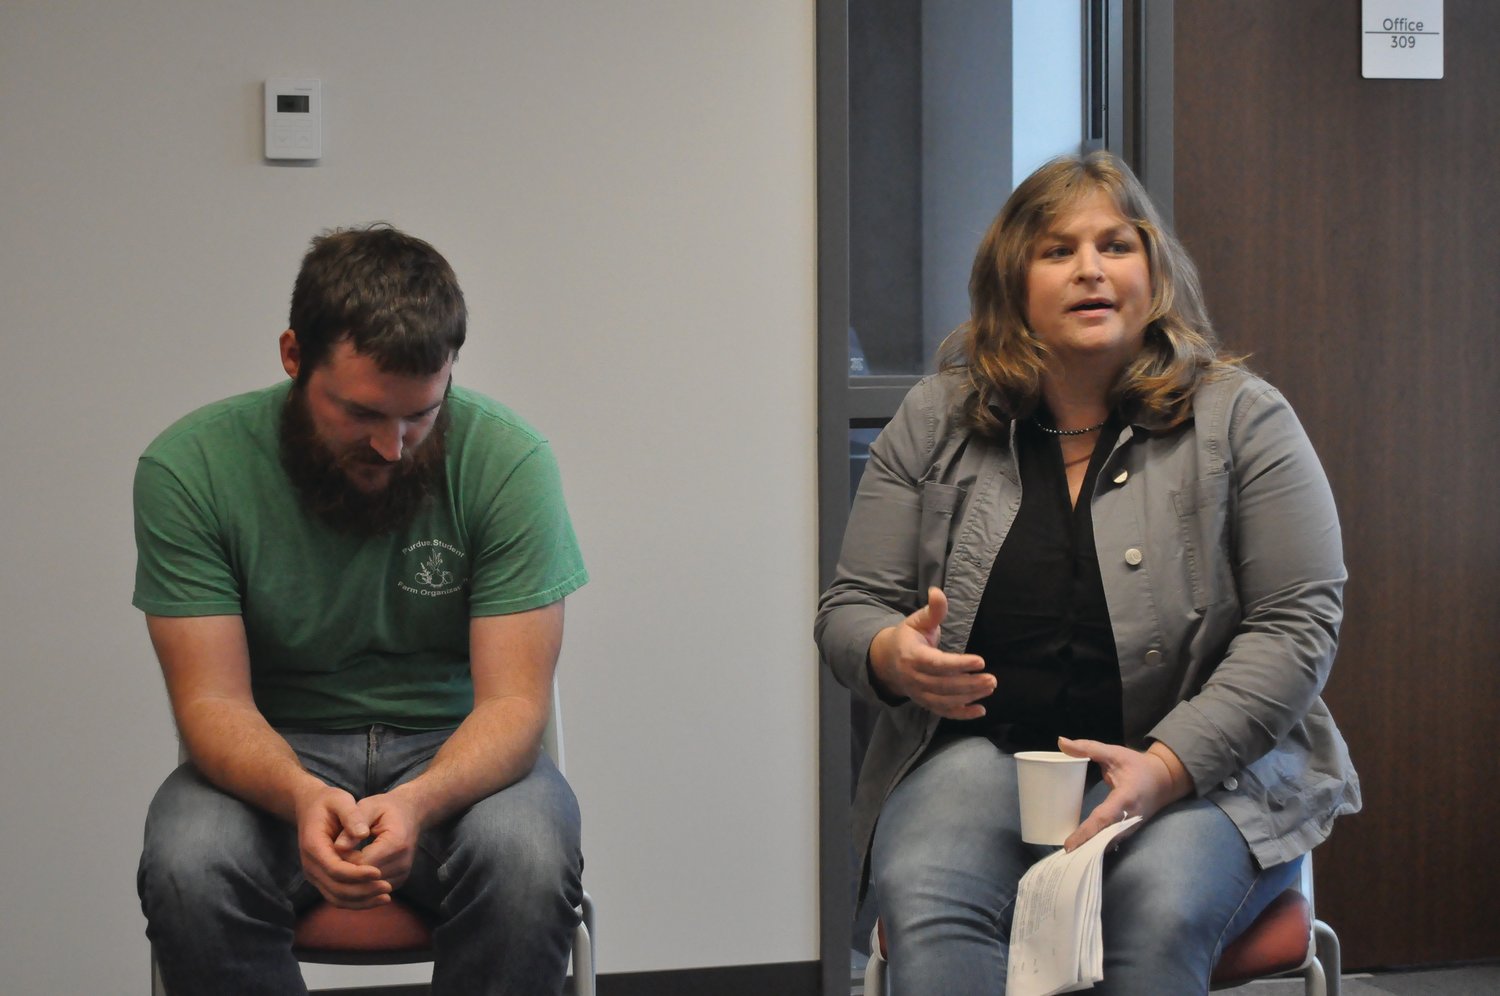 Jessica Roosa, right, president of This Old Farm, speaks during a panel discussion as Chris Adair of Purdue Student Farm listens Wednesday at the Montgomery County Local Food Summit in Fusion 54.